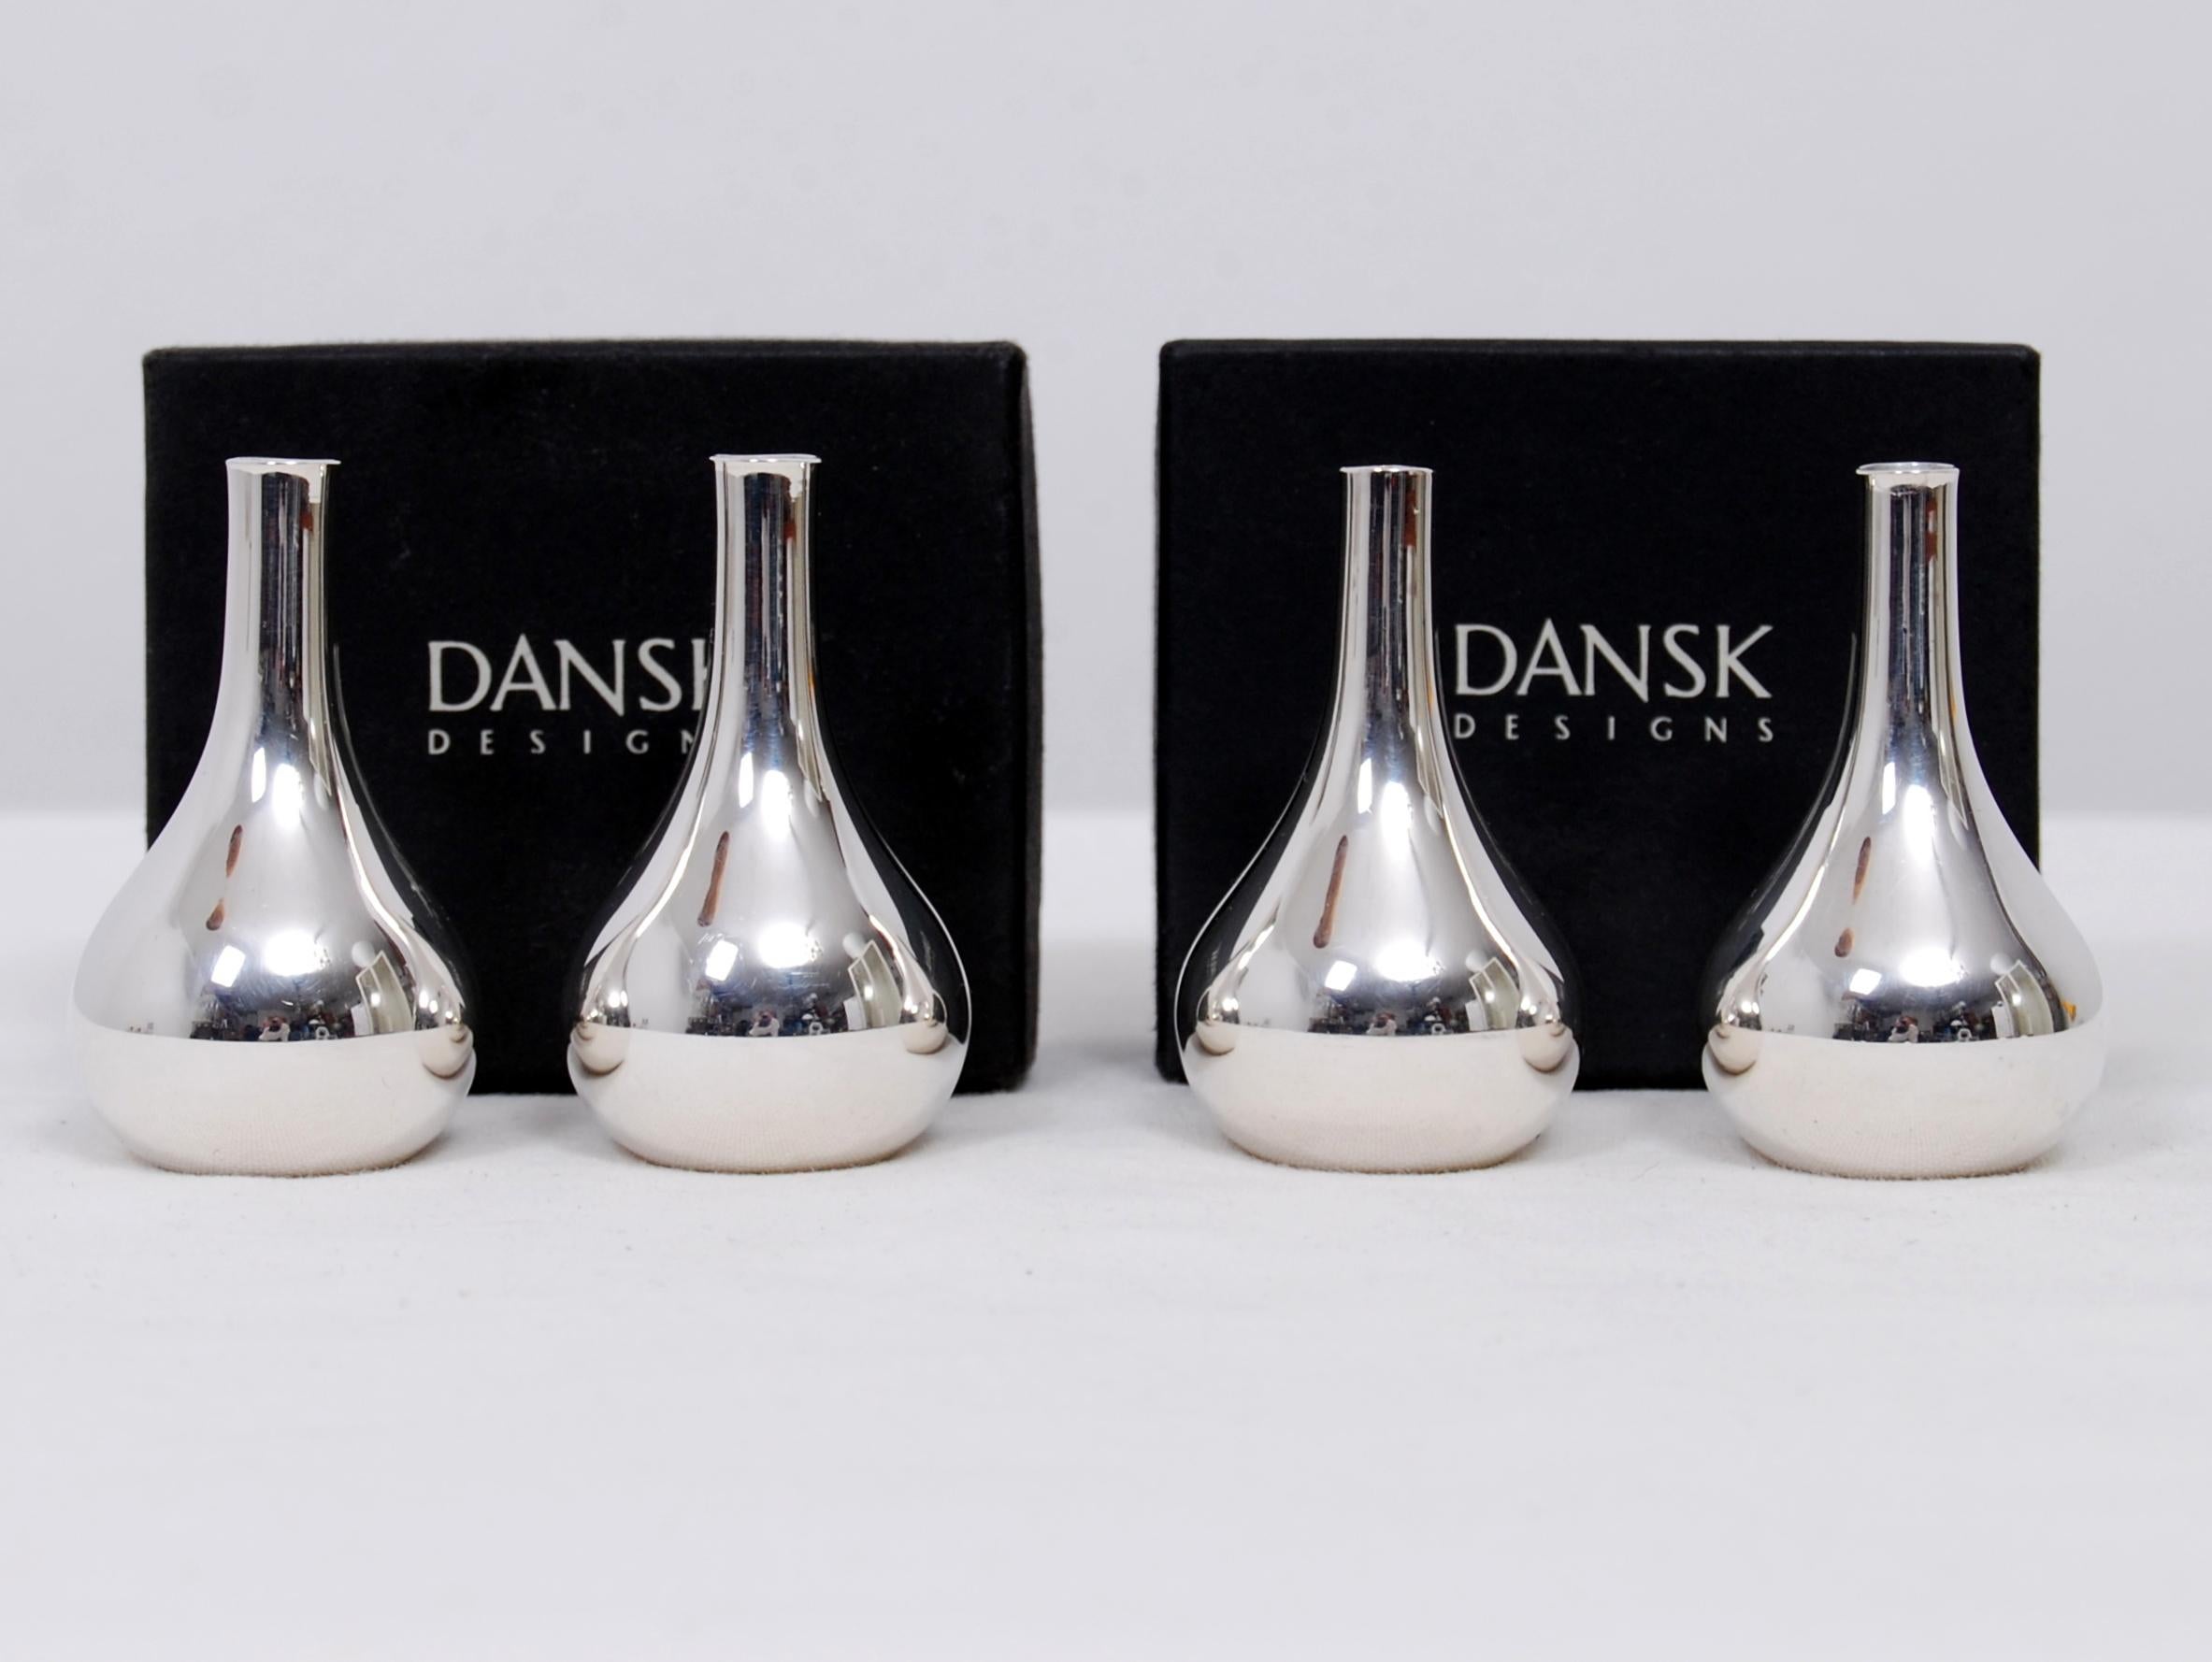 A set of two pairs of Dansk design silver plated taper sticks or candleholders designed by Jens Quistgaard, marked Dansk Design Denmark, IHQ. Original packing boxes included. Excellent vintage condition.









 